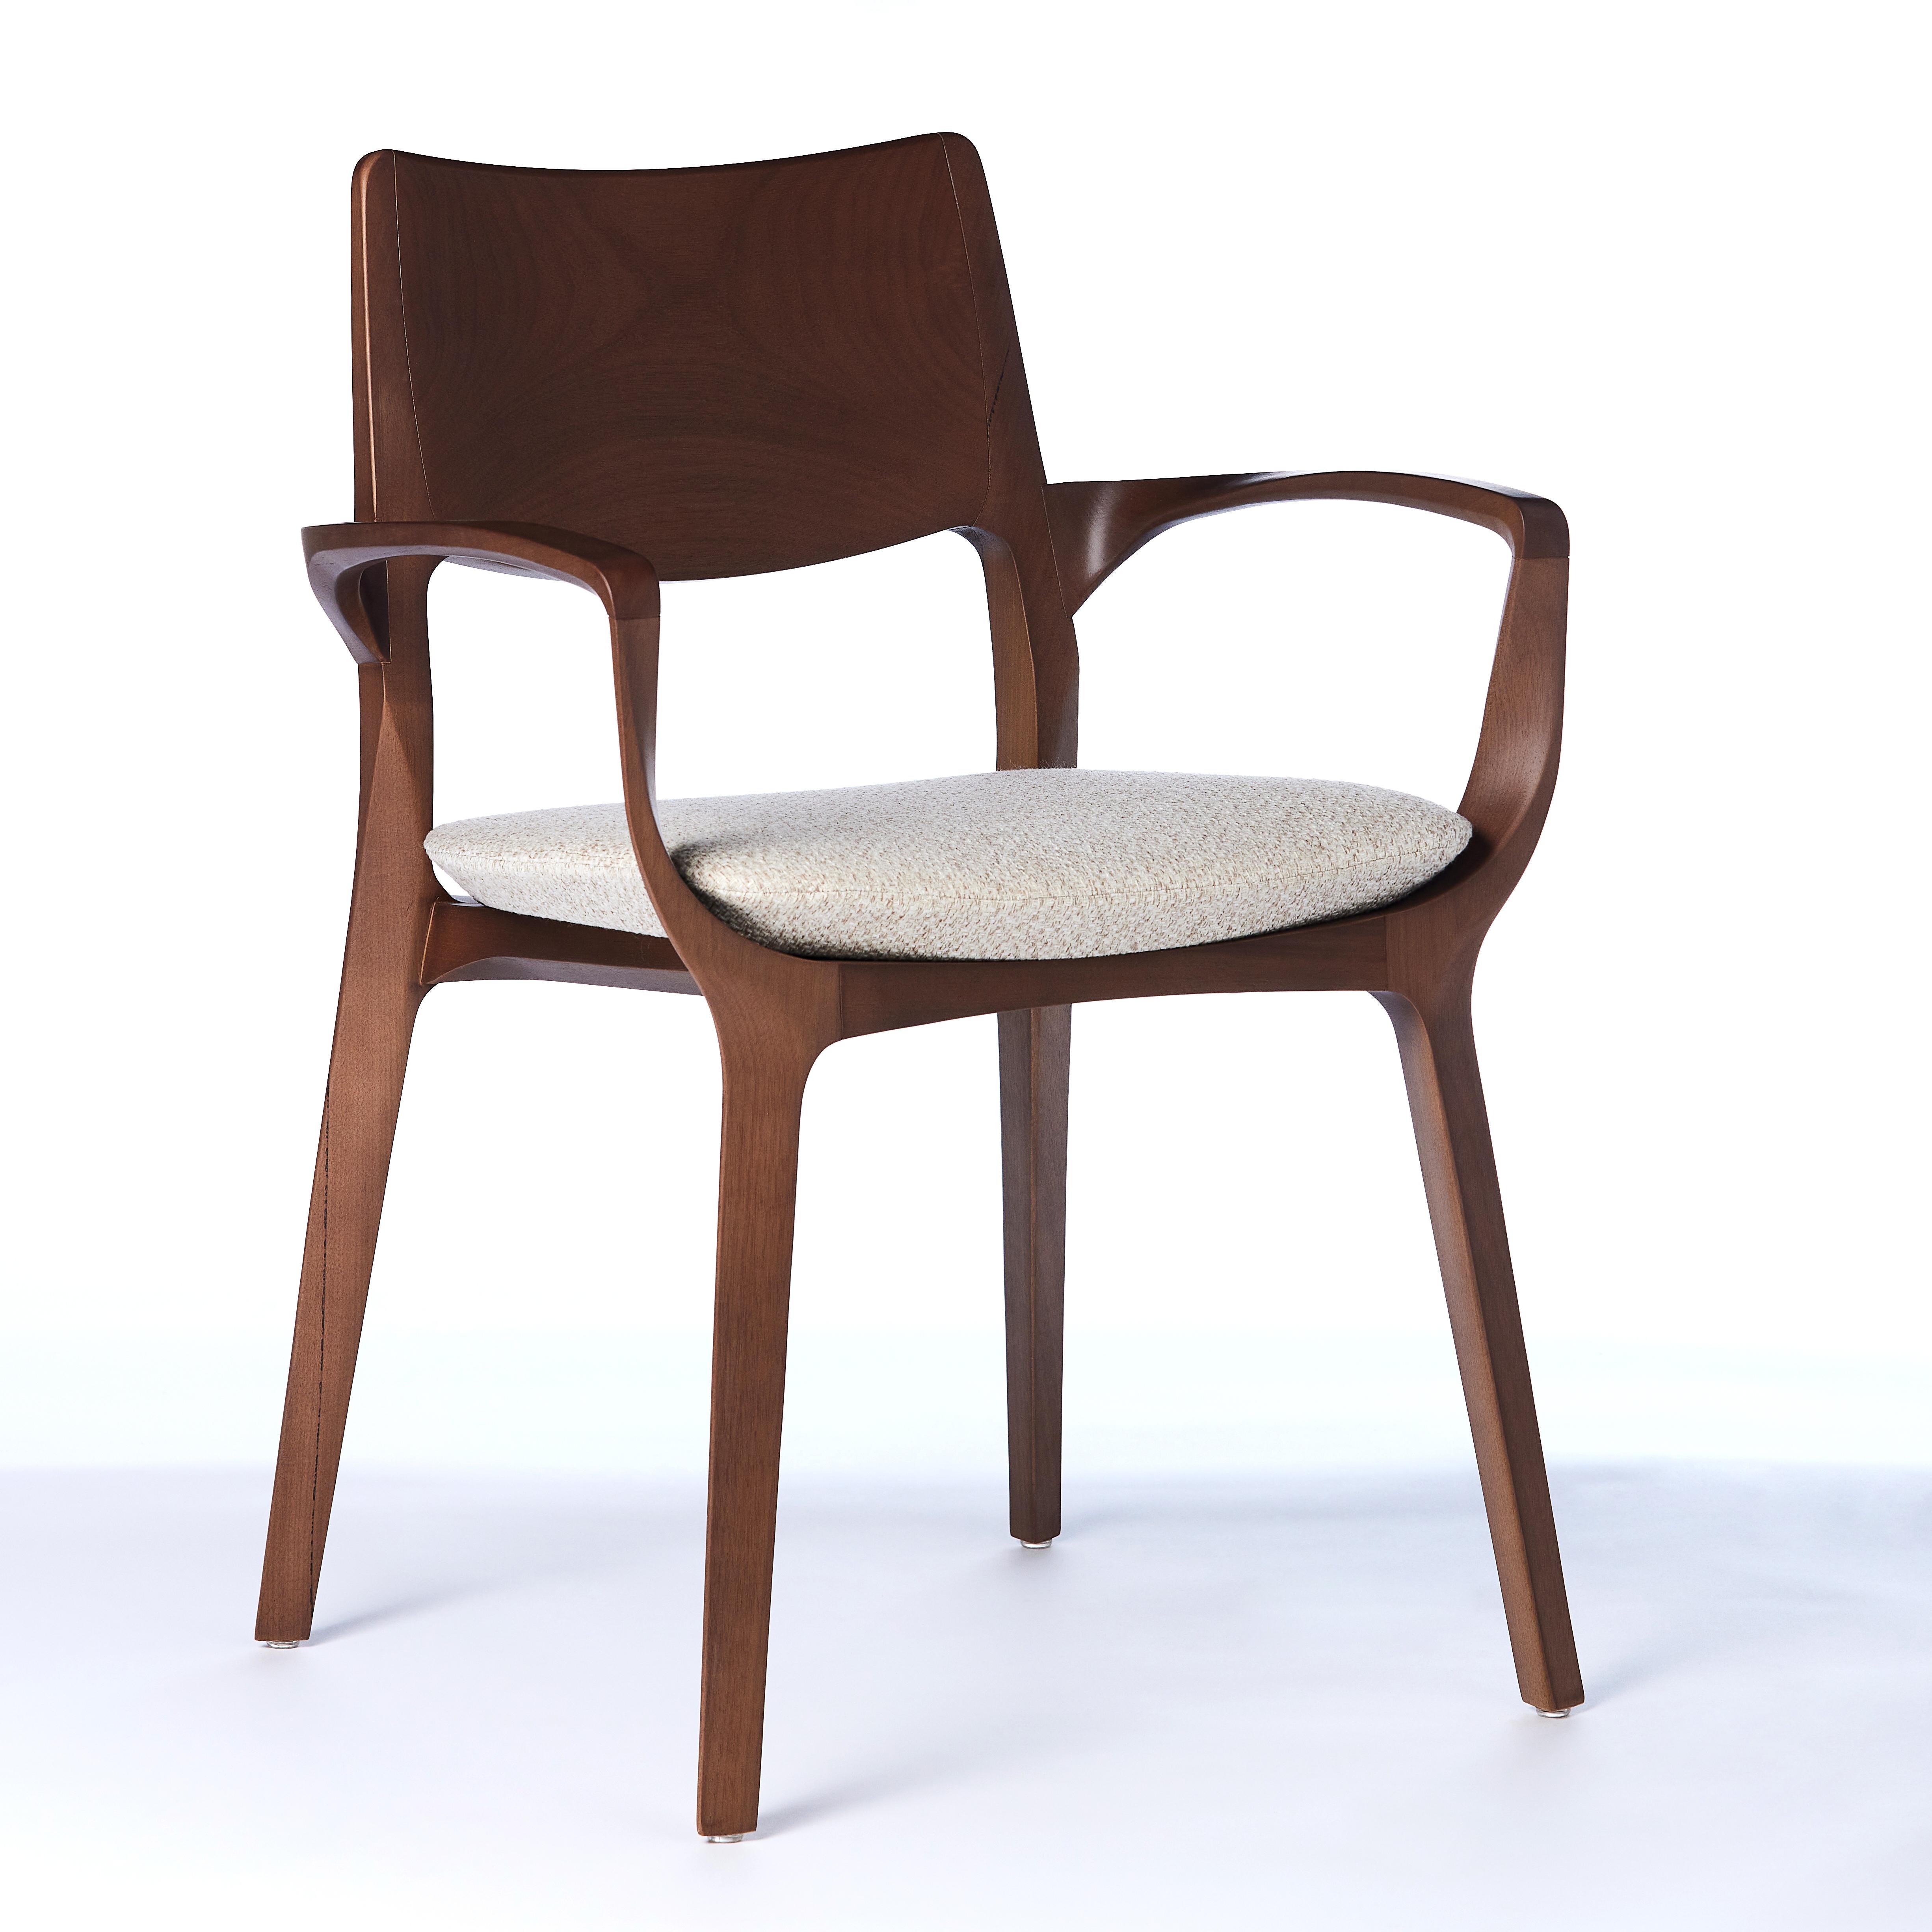 The Moderns Aurora Chair Sculptured in Walnut Finish No Arms, Upholstering Seat en vente 1